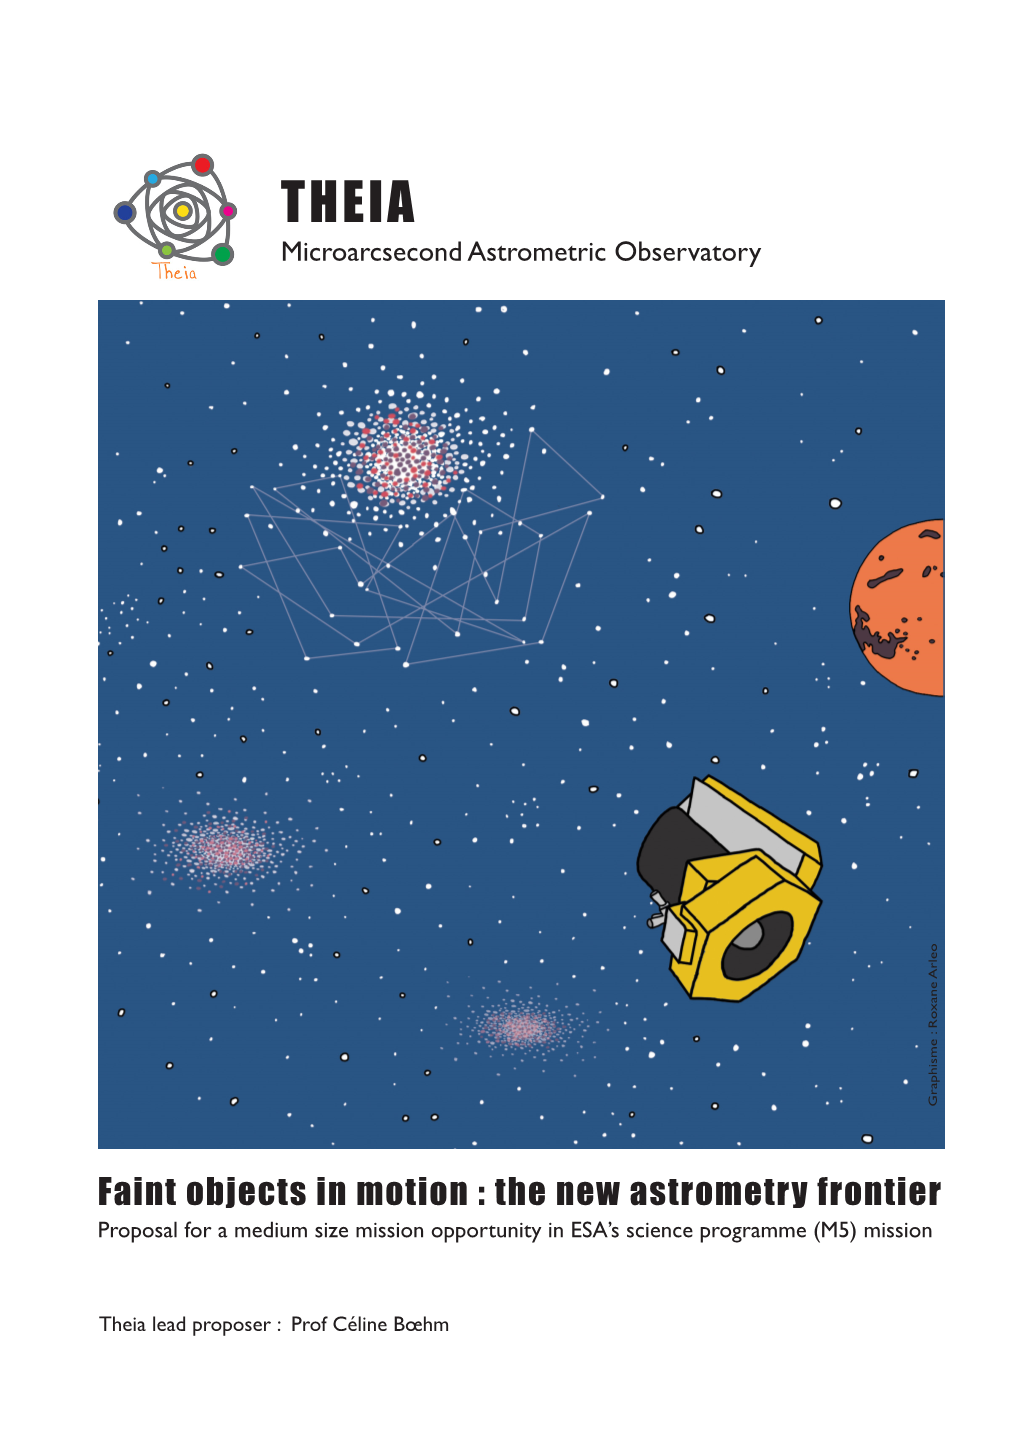 The New Astrometry Frontier Proposal for a Medium Size Mission Opportunity in ESA’S Science Programme (M5) Mission